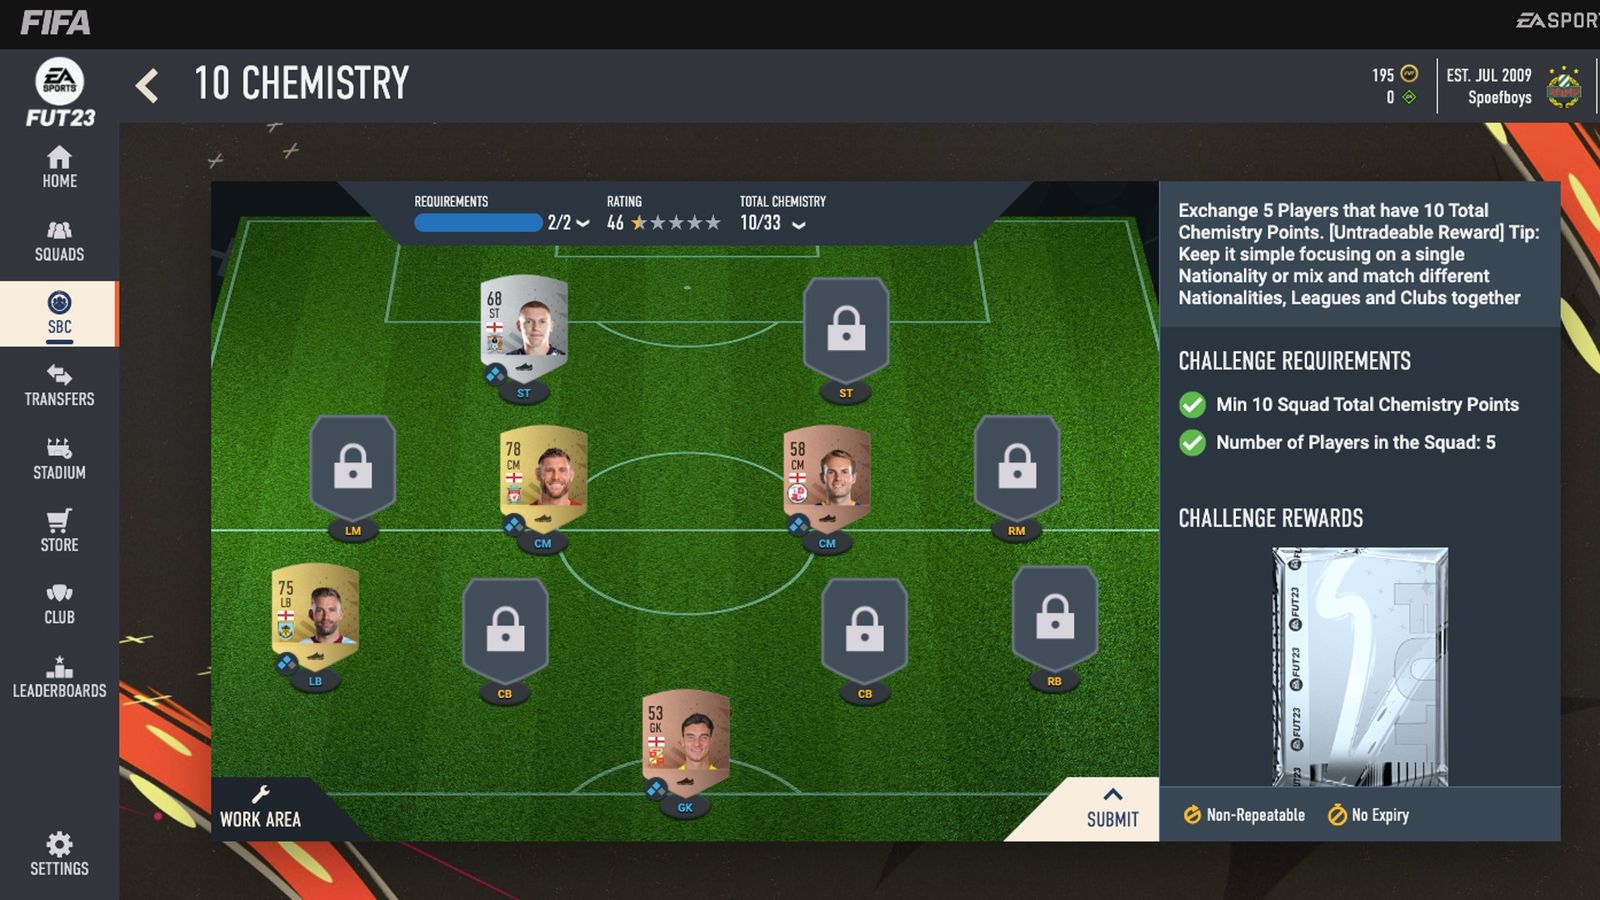 Image of the 10 Chemistry SBC in FIFA 23.